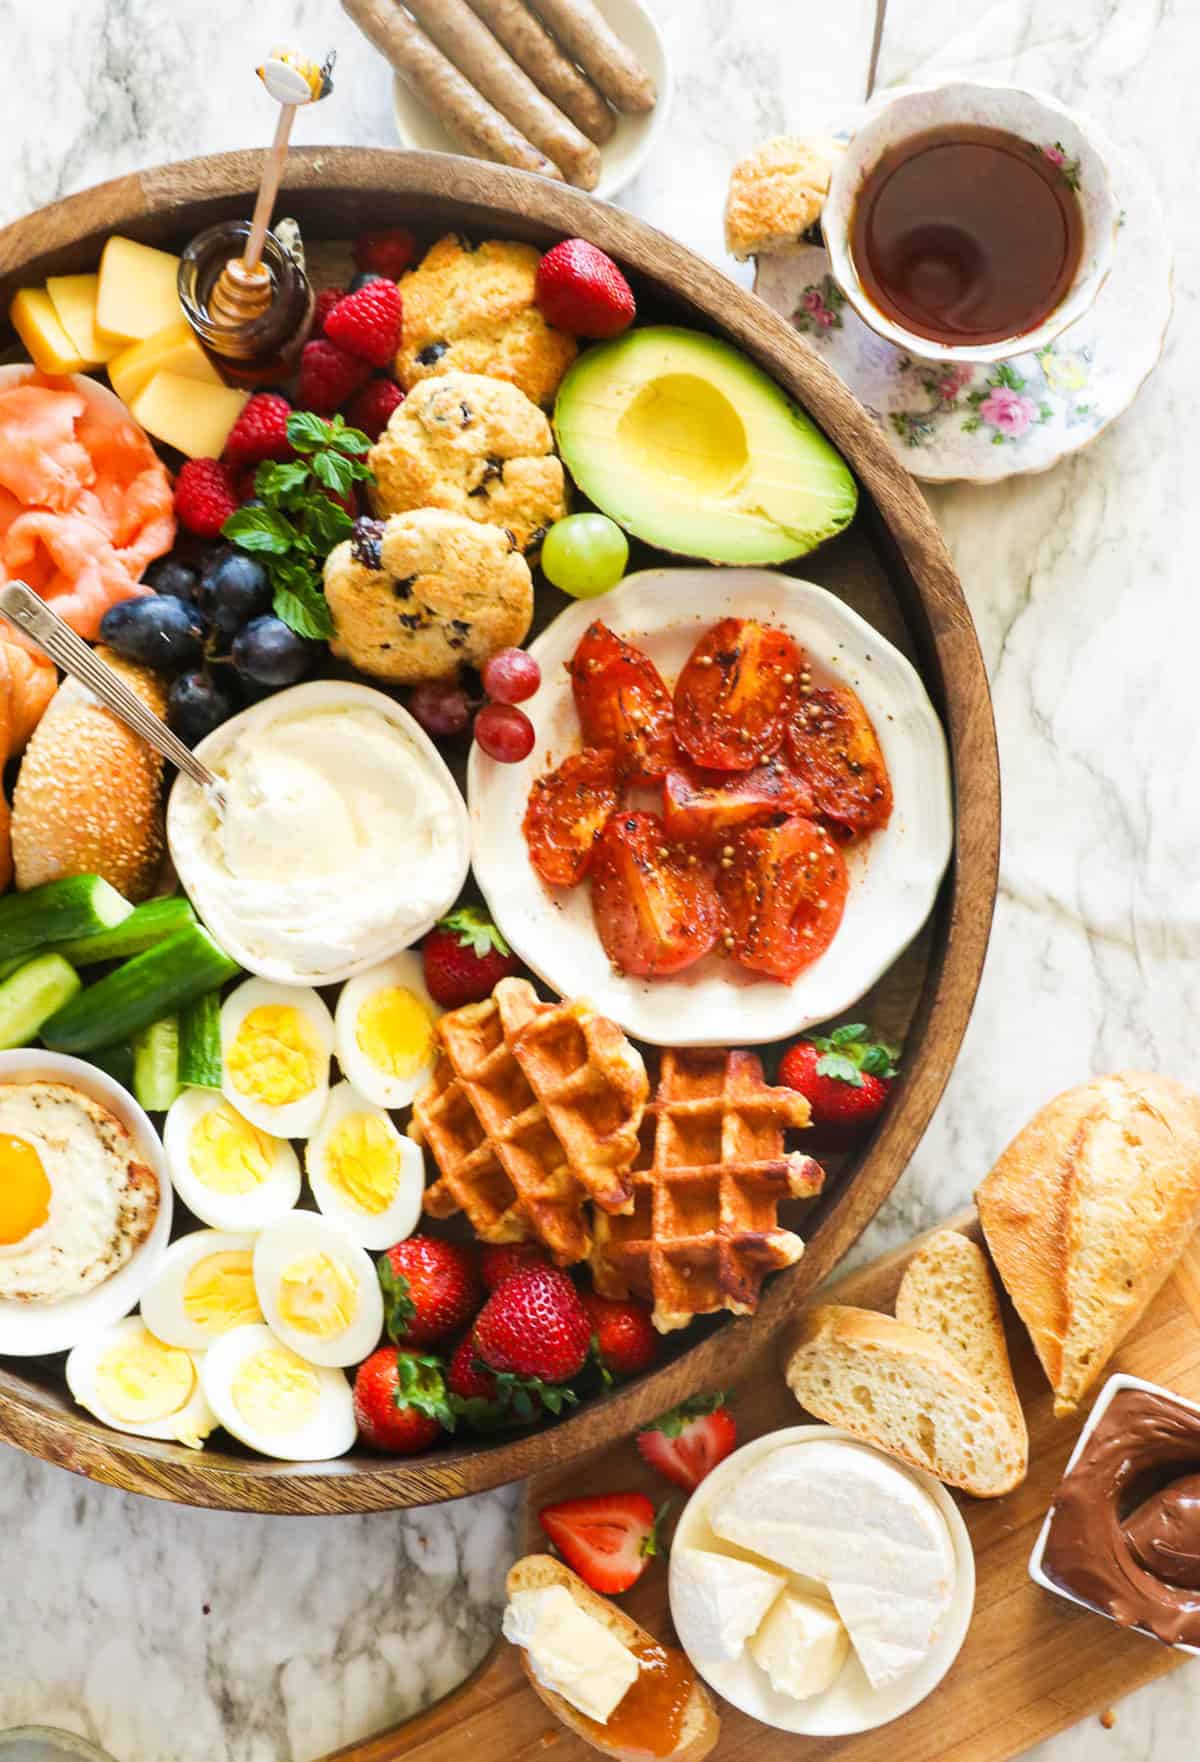 Breakfast charcuterie board ideas perfect for family get-togethers